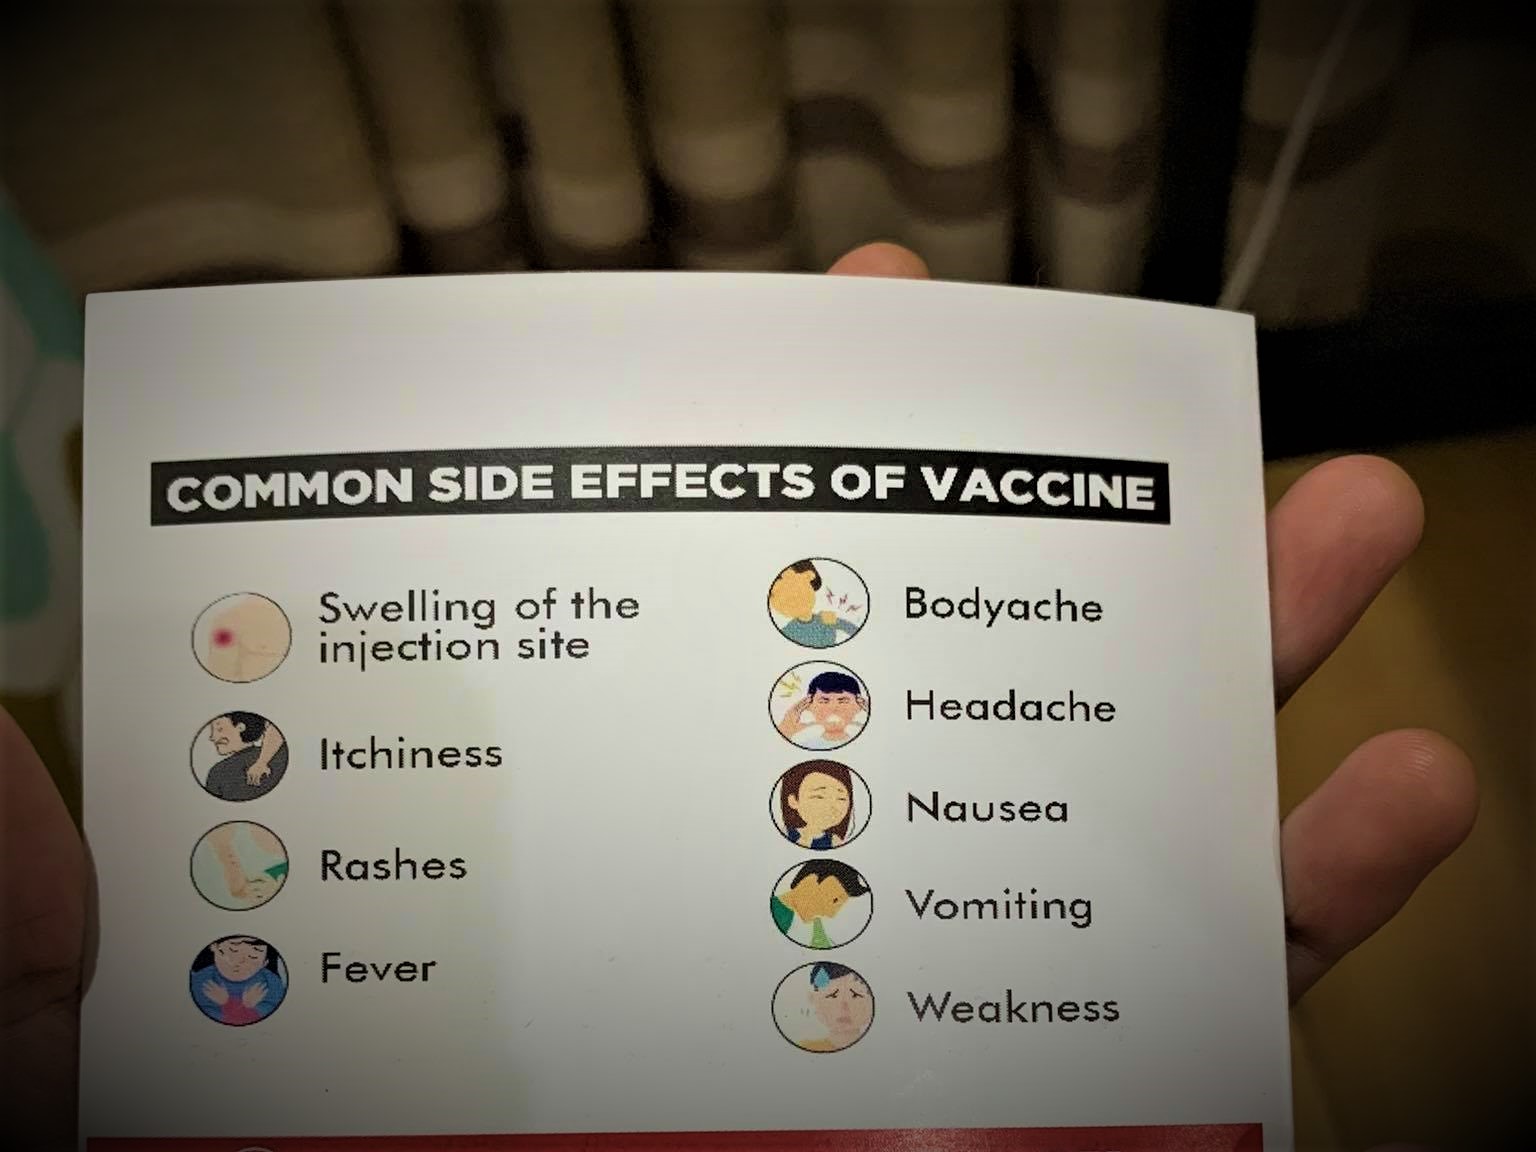 Common side effects of vaccine